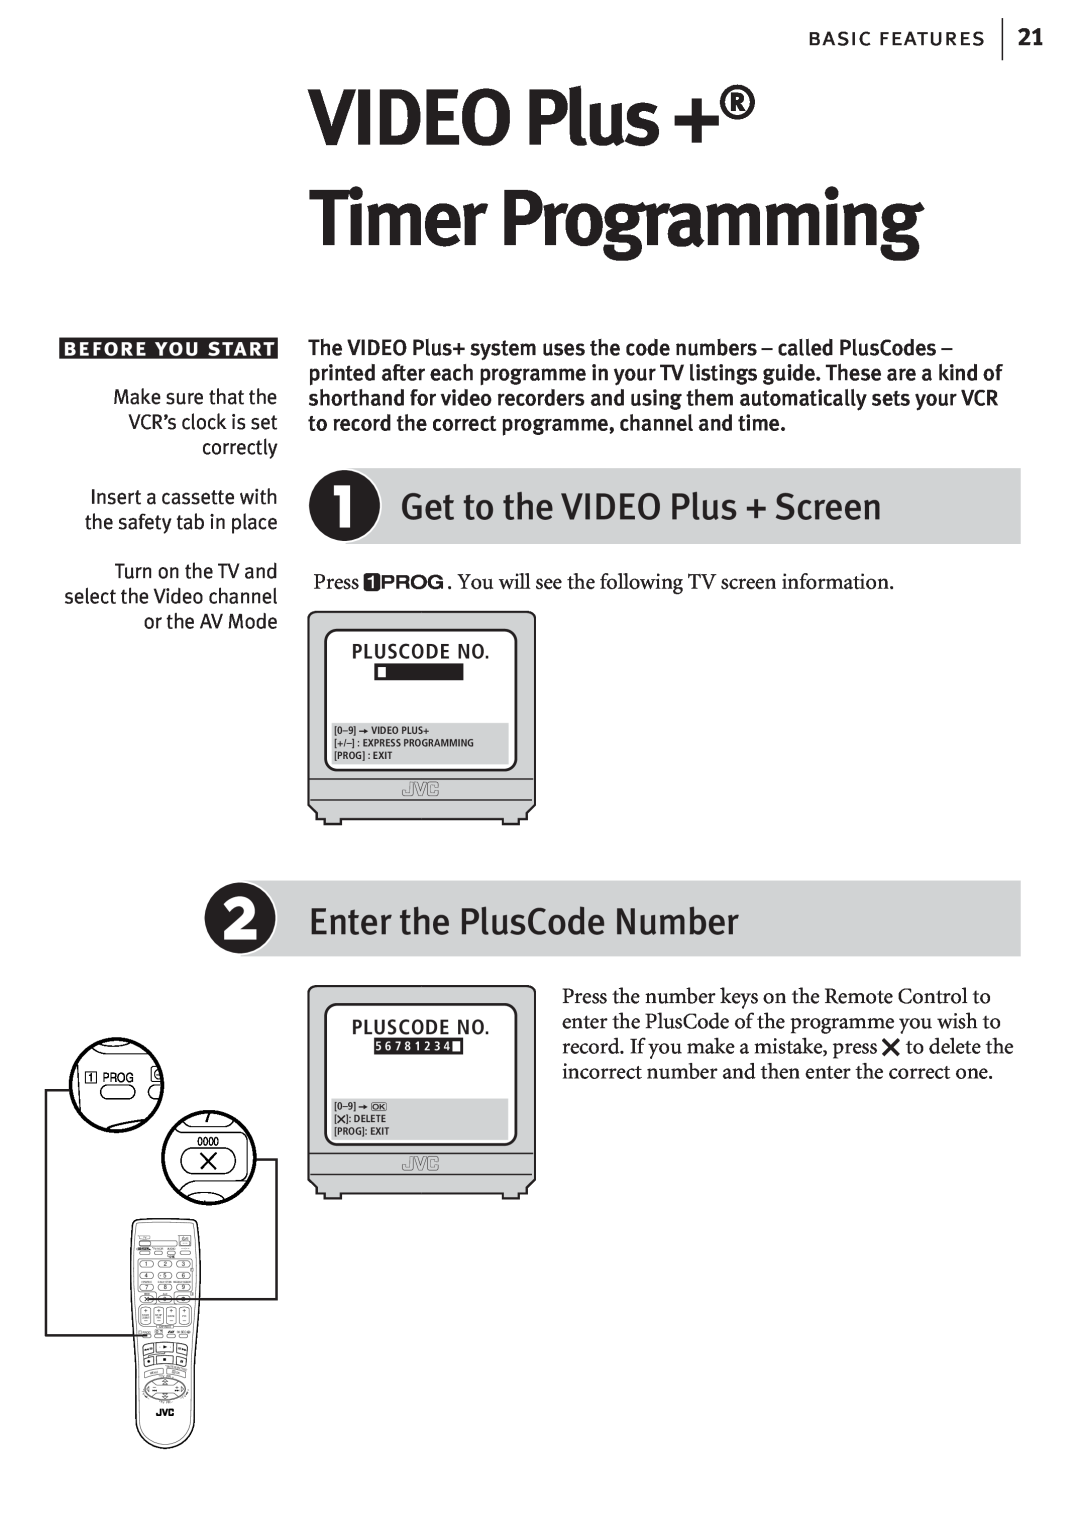 JVC HR-J680EK VIDEO Plus +¨ Timer Programming, Get to the VIDEO Plus + Screen, Enter the PlusCode Number, before you start 